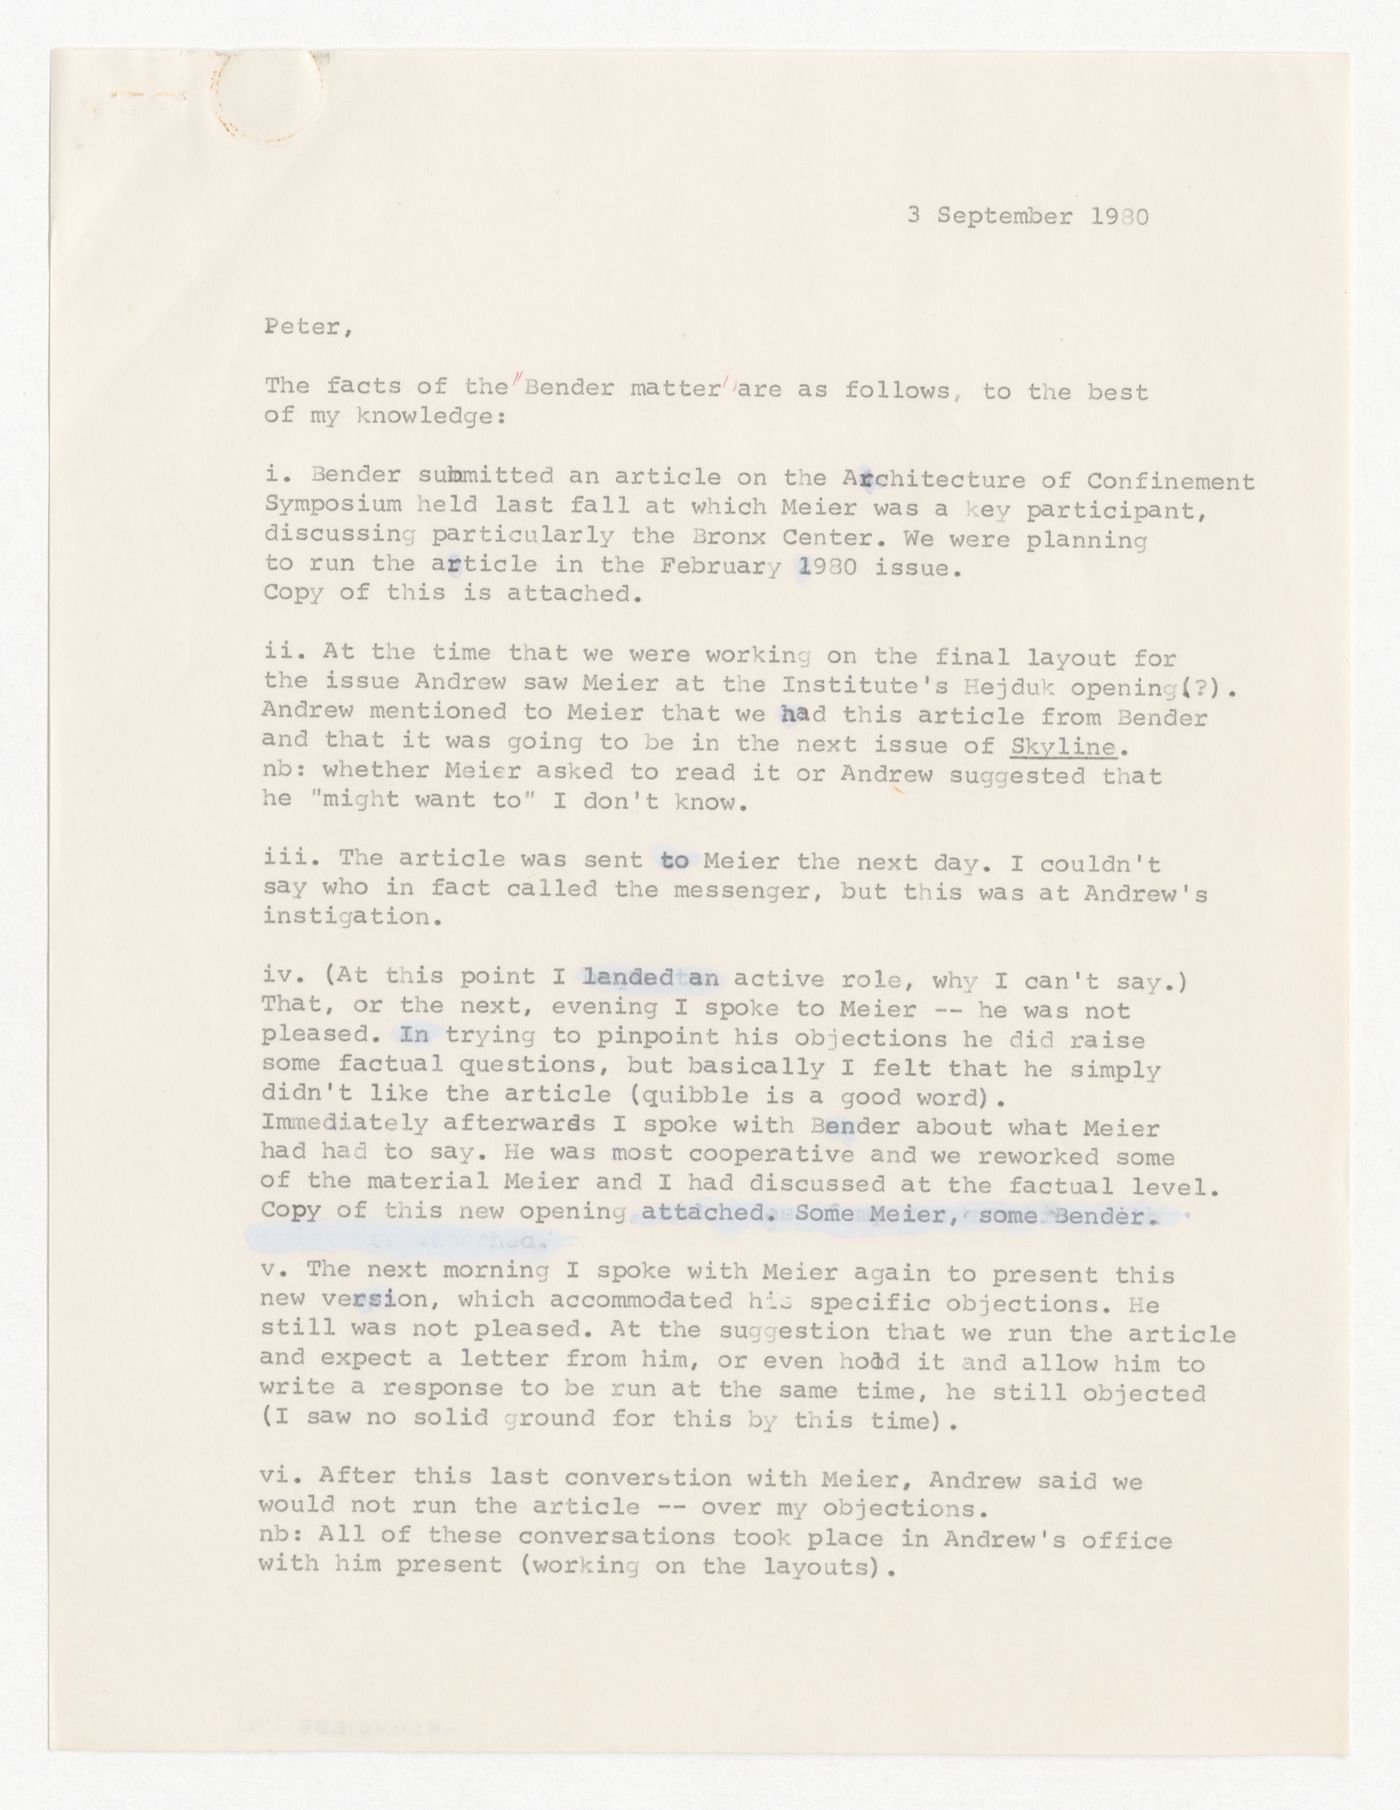 Letter from Margot Jacqz to Peter D. Eisenman about the retraction of an article by Thomas Bender from Skyline